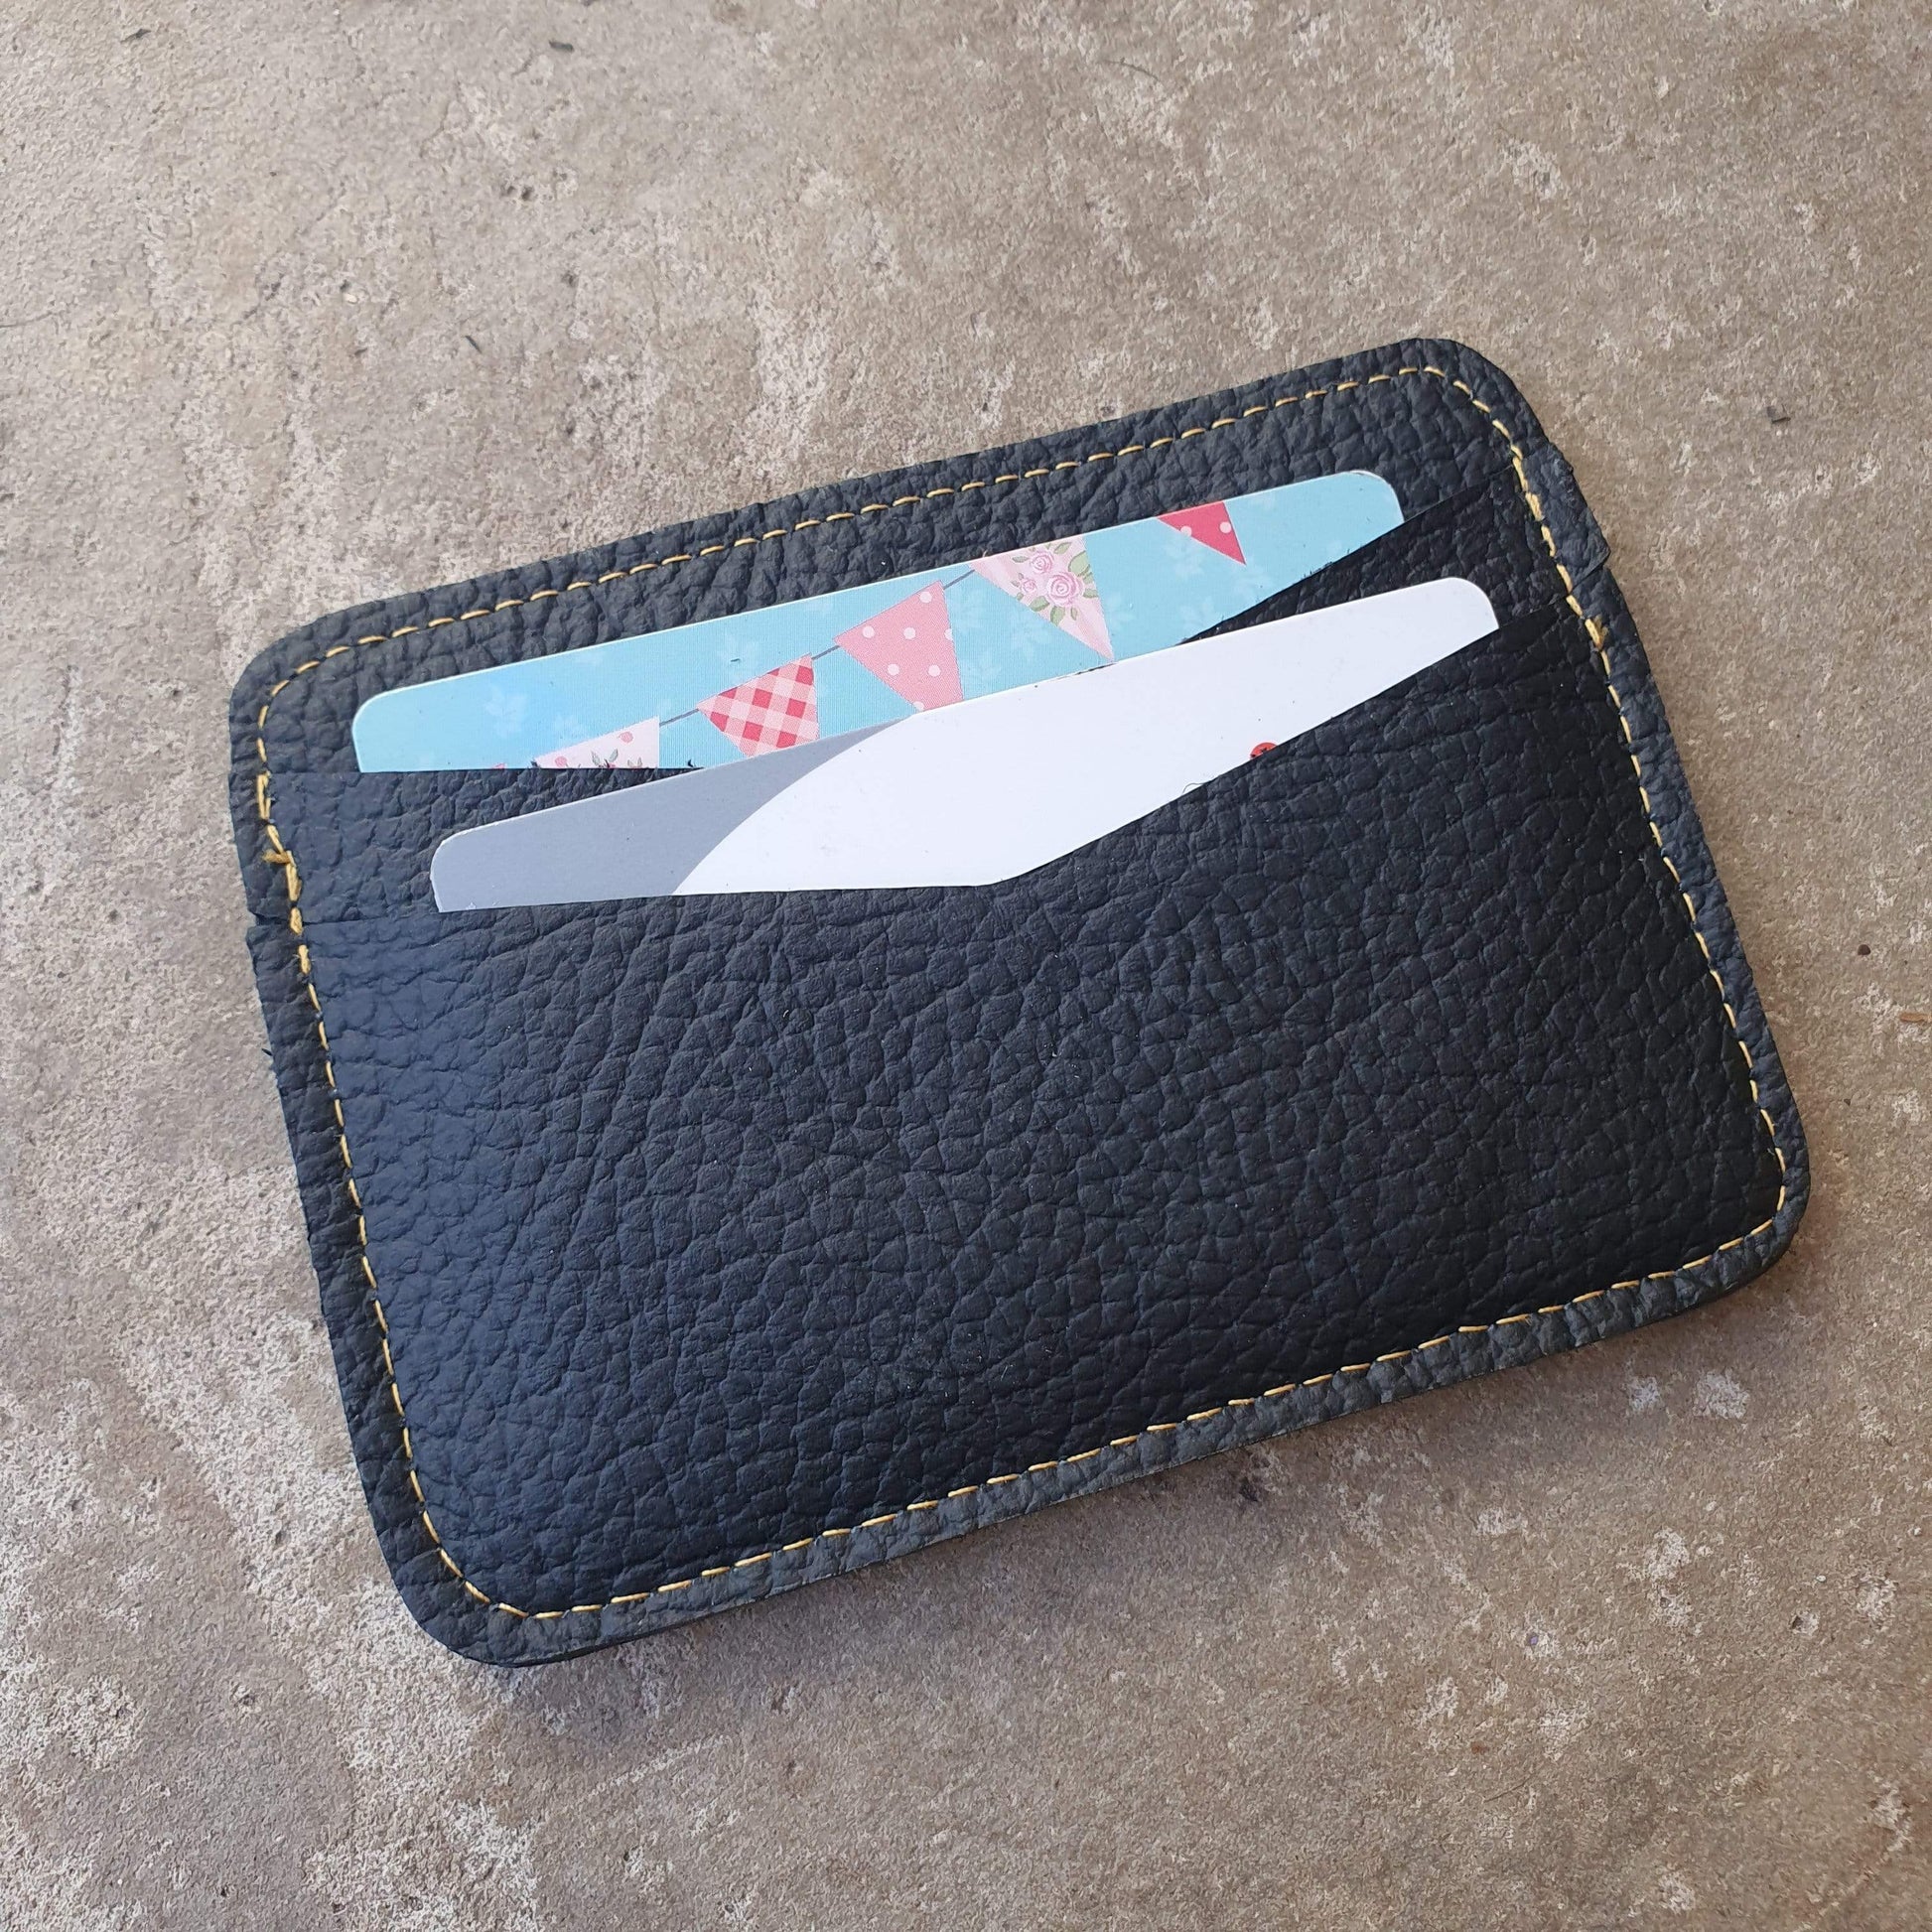 Zoe Dunn Designs Purse / Wallet Card Holder - Recycled Leather